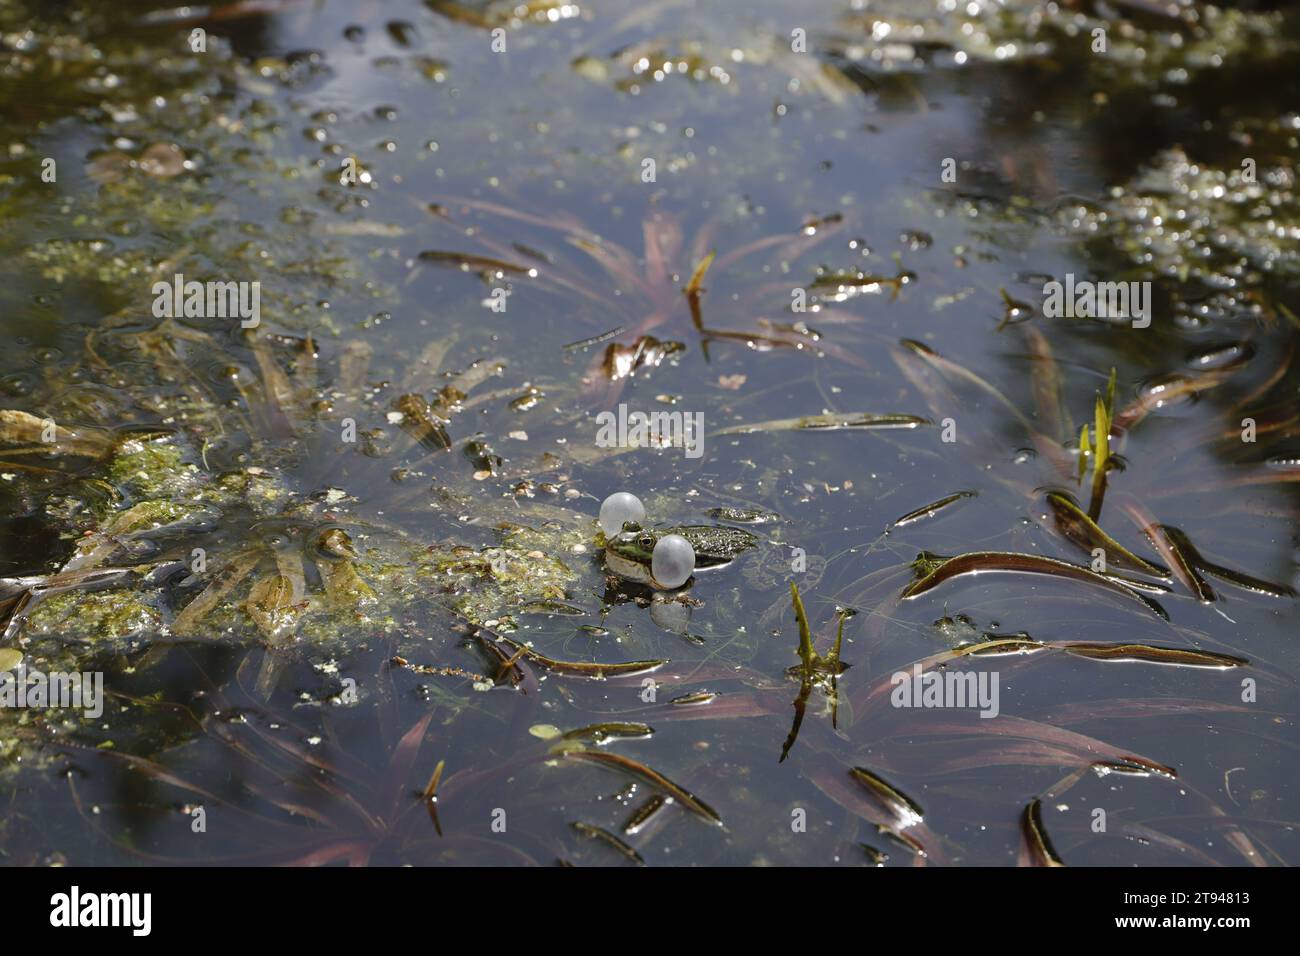 Croaking frog in a pond Stock Photo